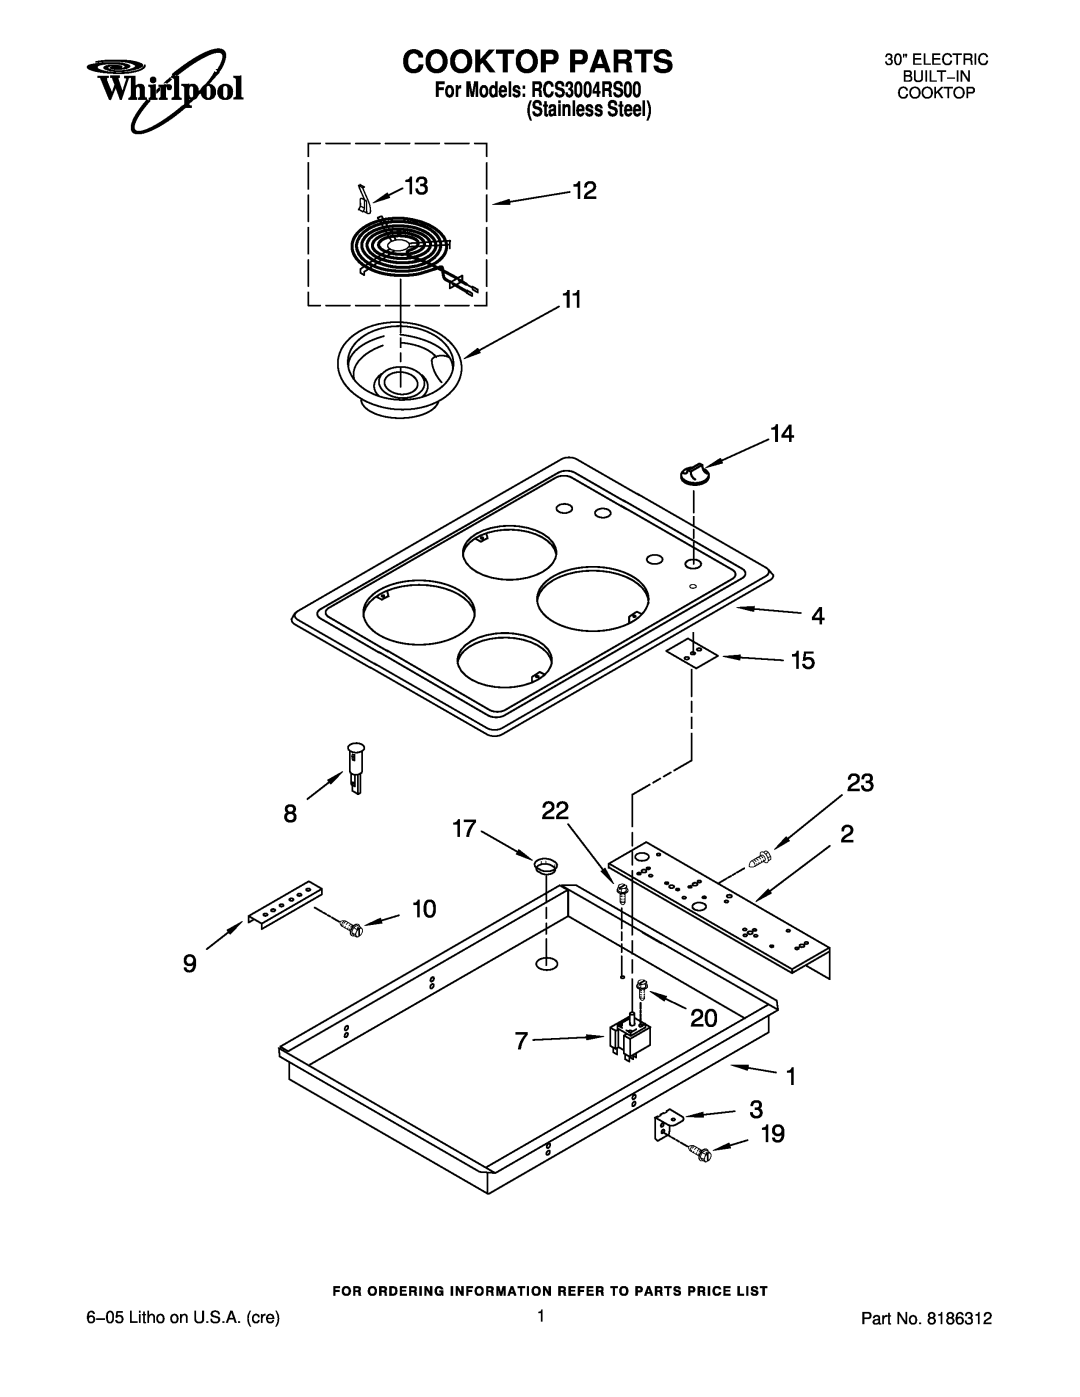 Whirlpool RCS3004RS01 manual Cooktop Parts, 6−05 Litho on U.S.A. cre, For Models RCS3004RS00 Stainless Steel 